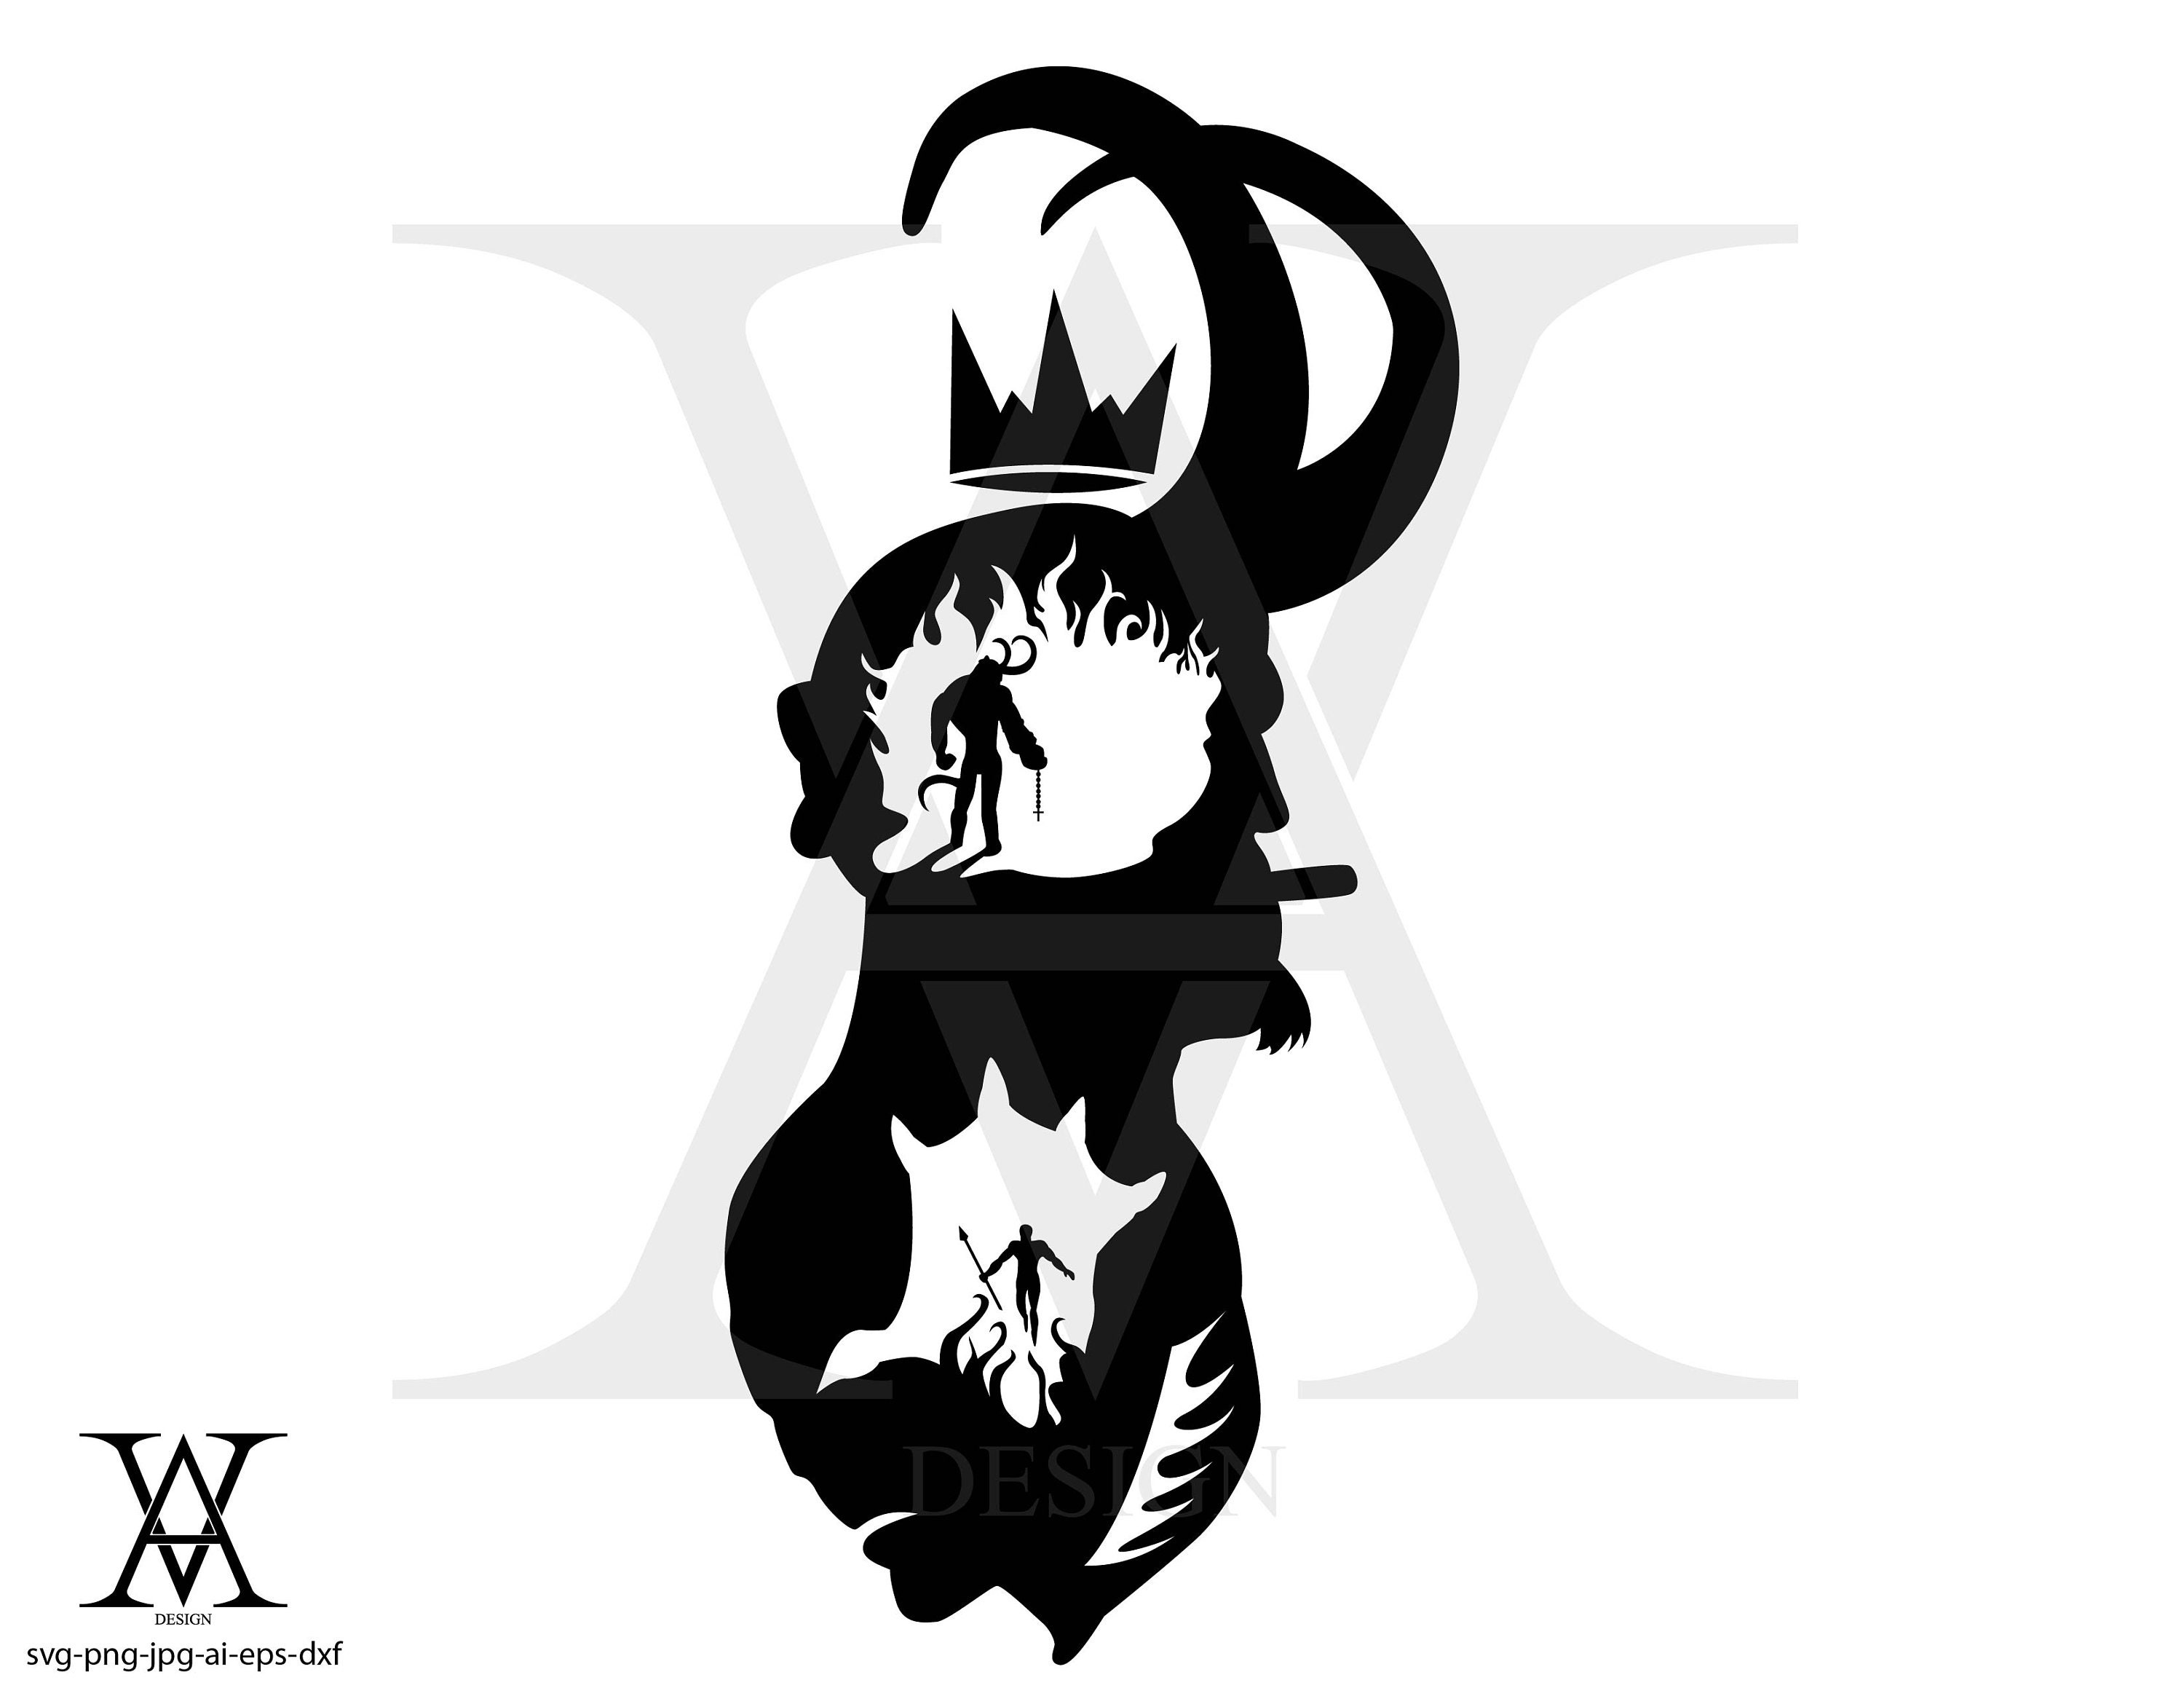 Download Hellboy Silhouette Clipart Instant Download Svg Png Eps Dxf Ai Jpg